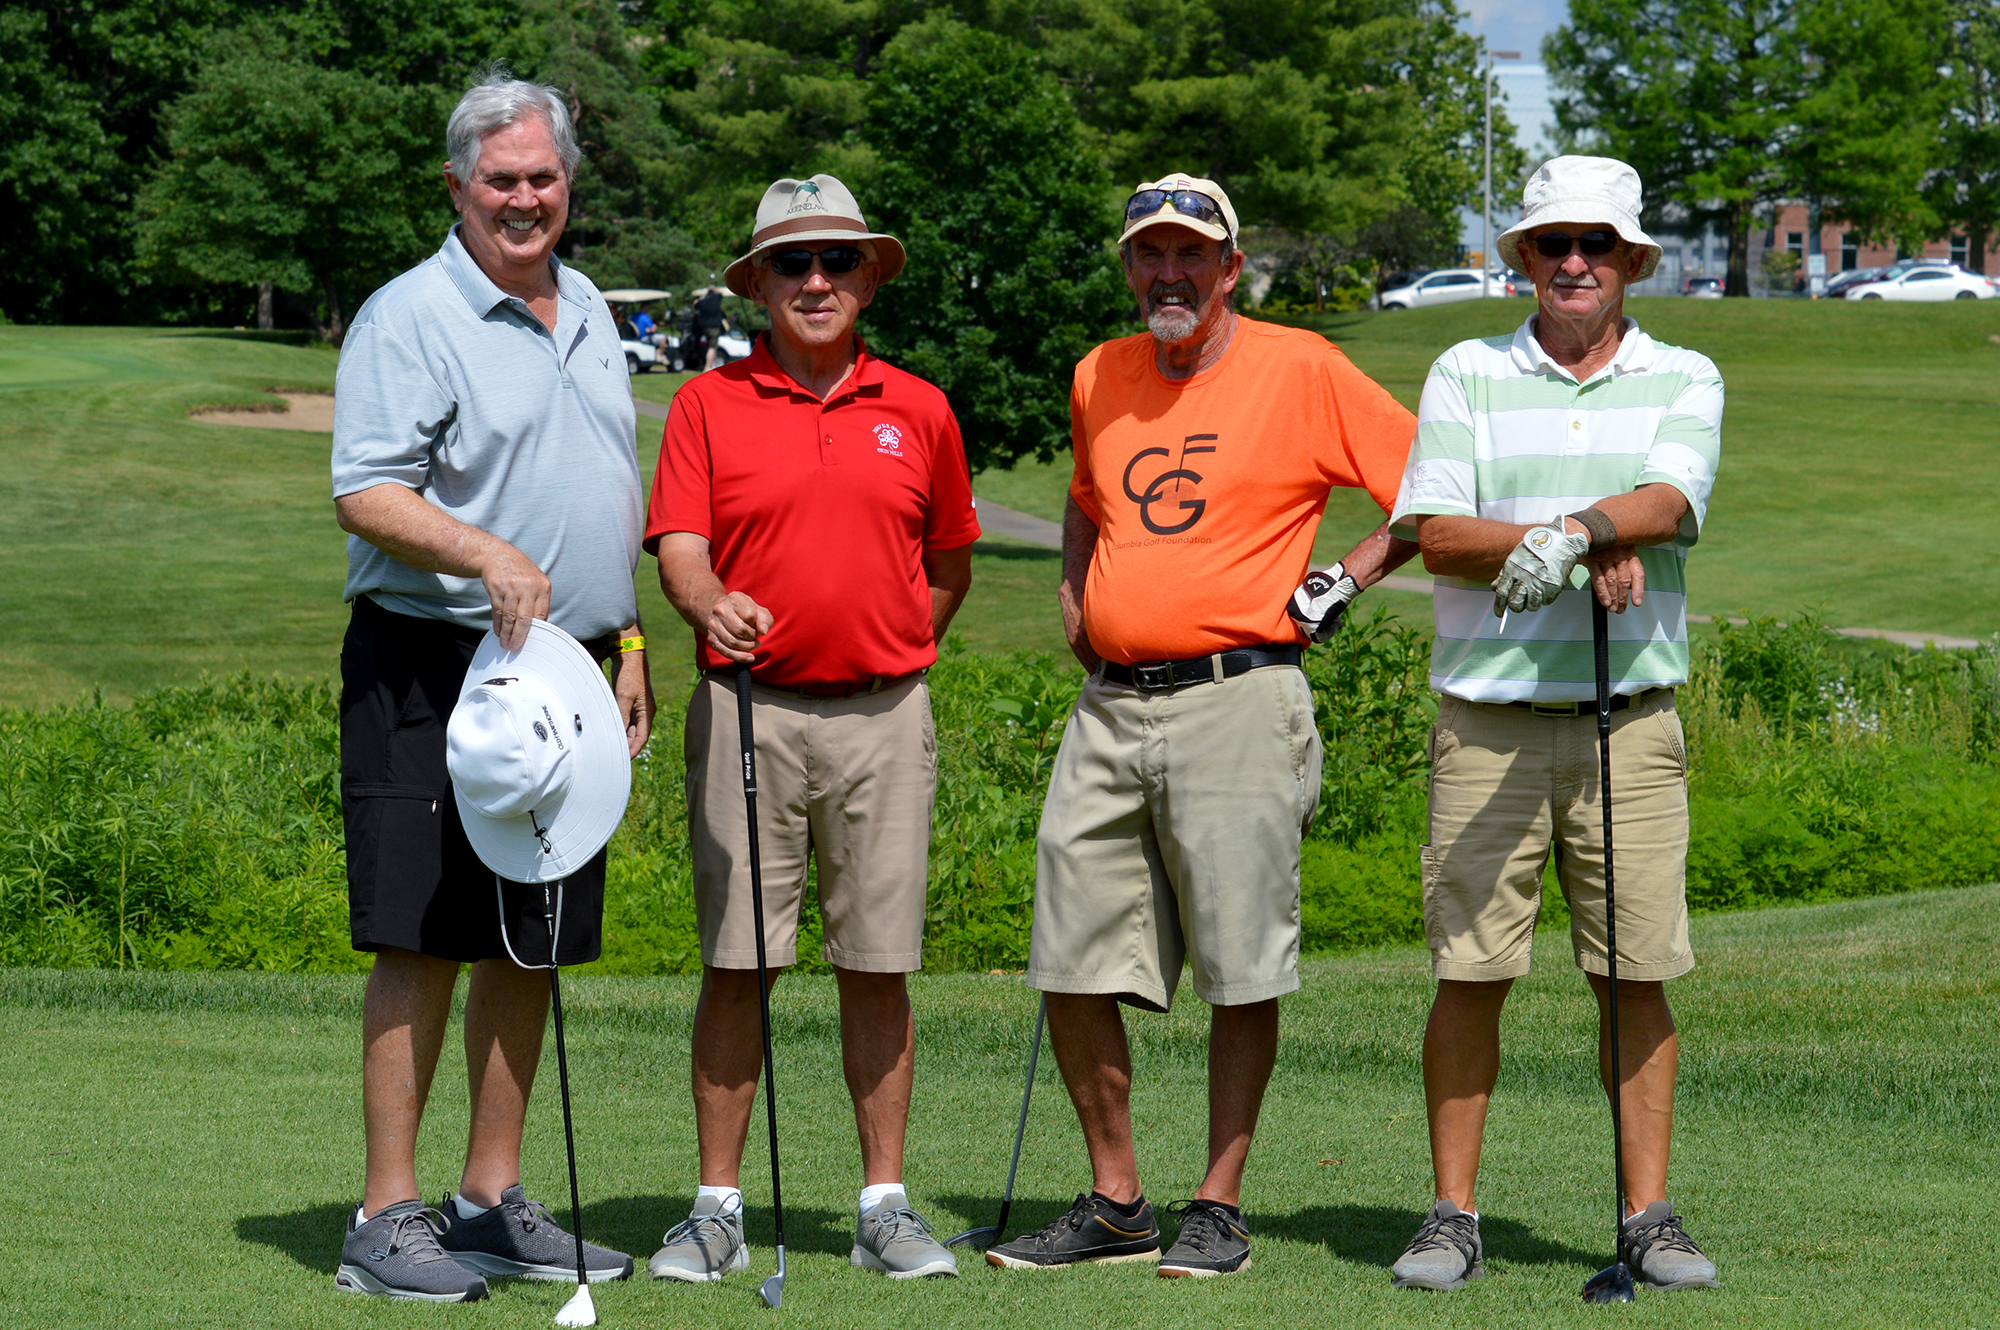 Open The Bob Idel Championship Cup at the 2022 4-H Clover Classic Golf Tournament went to the team of Hutton, Turner, Steele and Wilson.